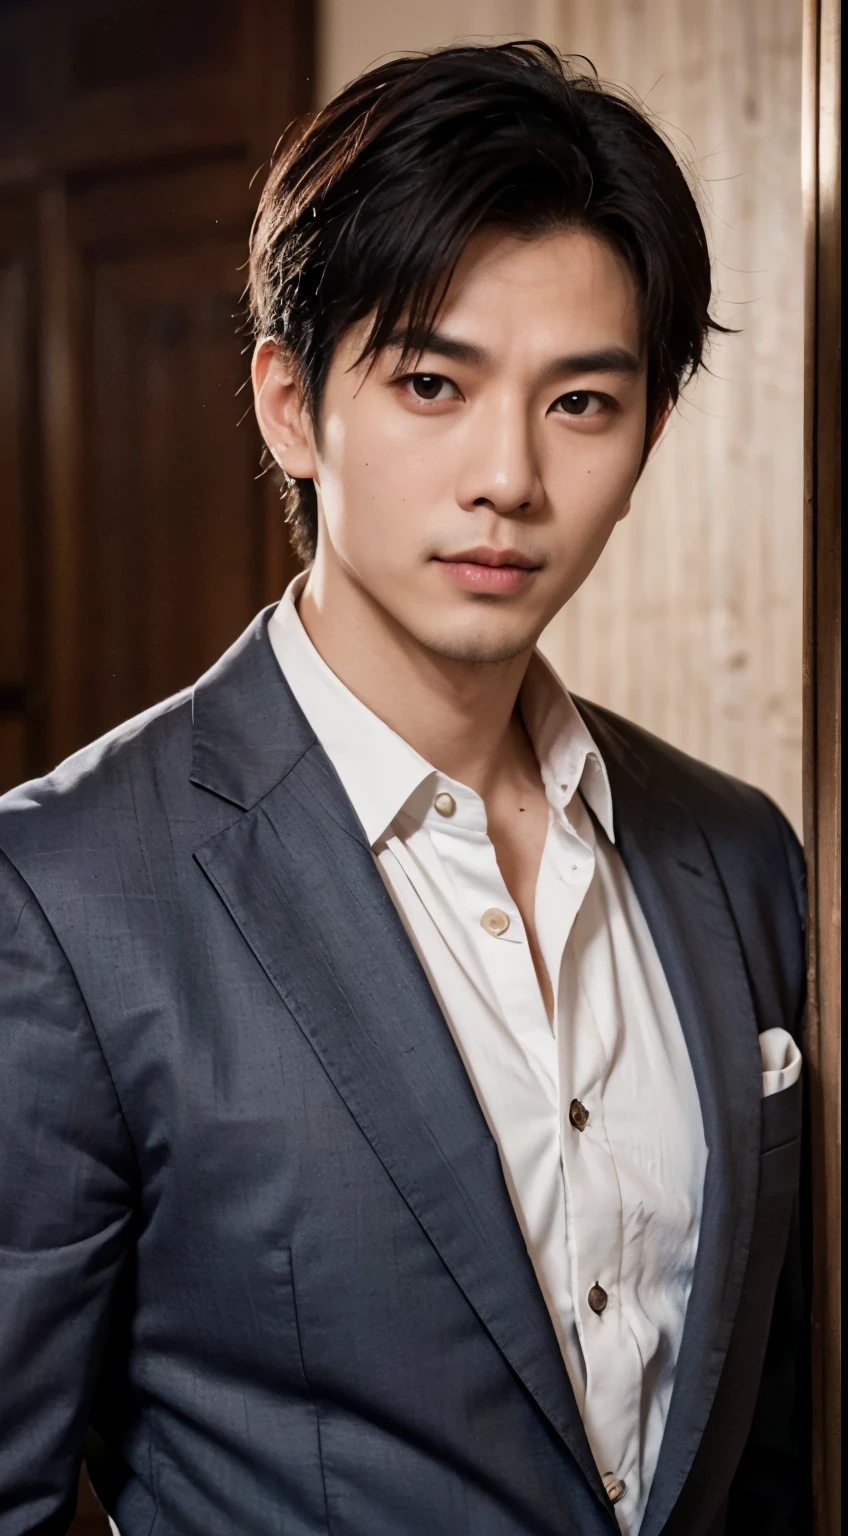 Portrait of a handsome Asian man 25 years old round face movie look, Above the chest, wearing suits